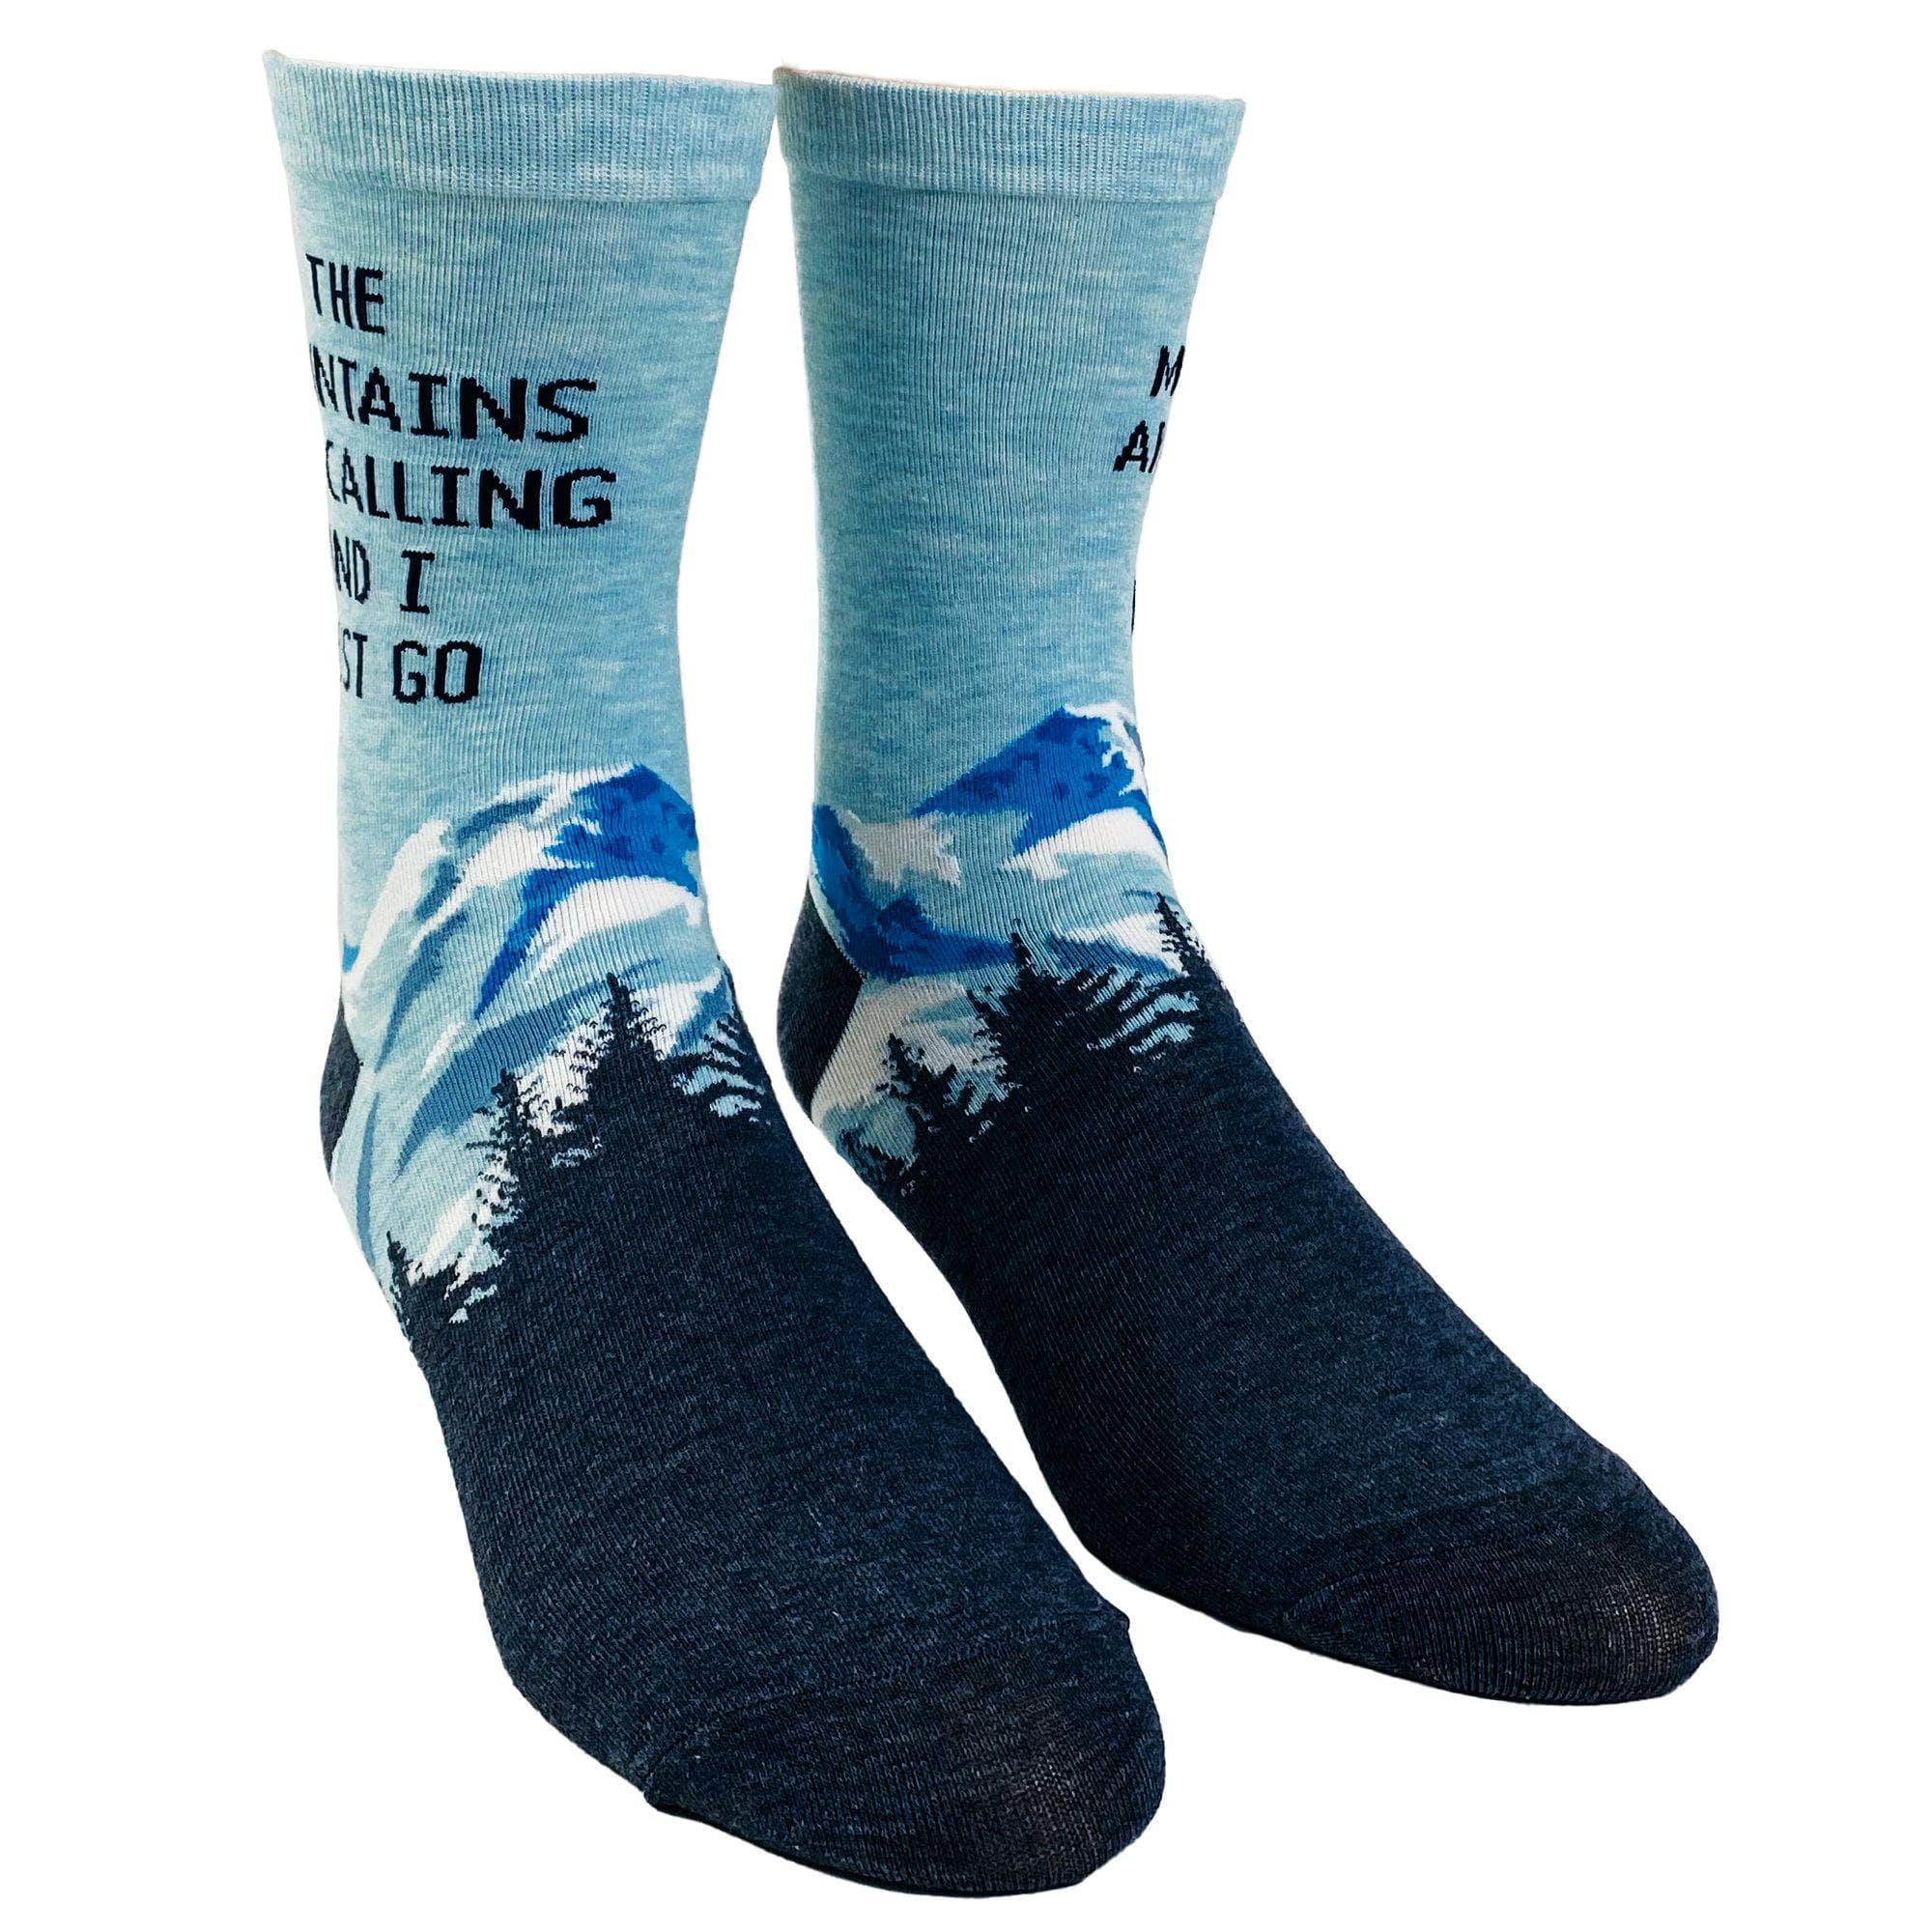 Men's The Mountains Are Calling And I Must Go Socks - Crazy Dog T-Shirts